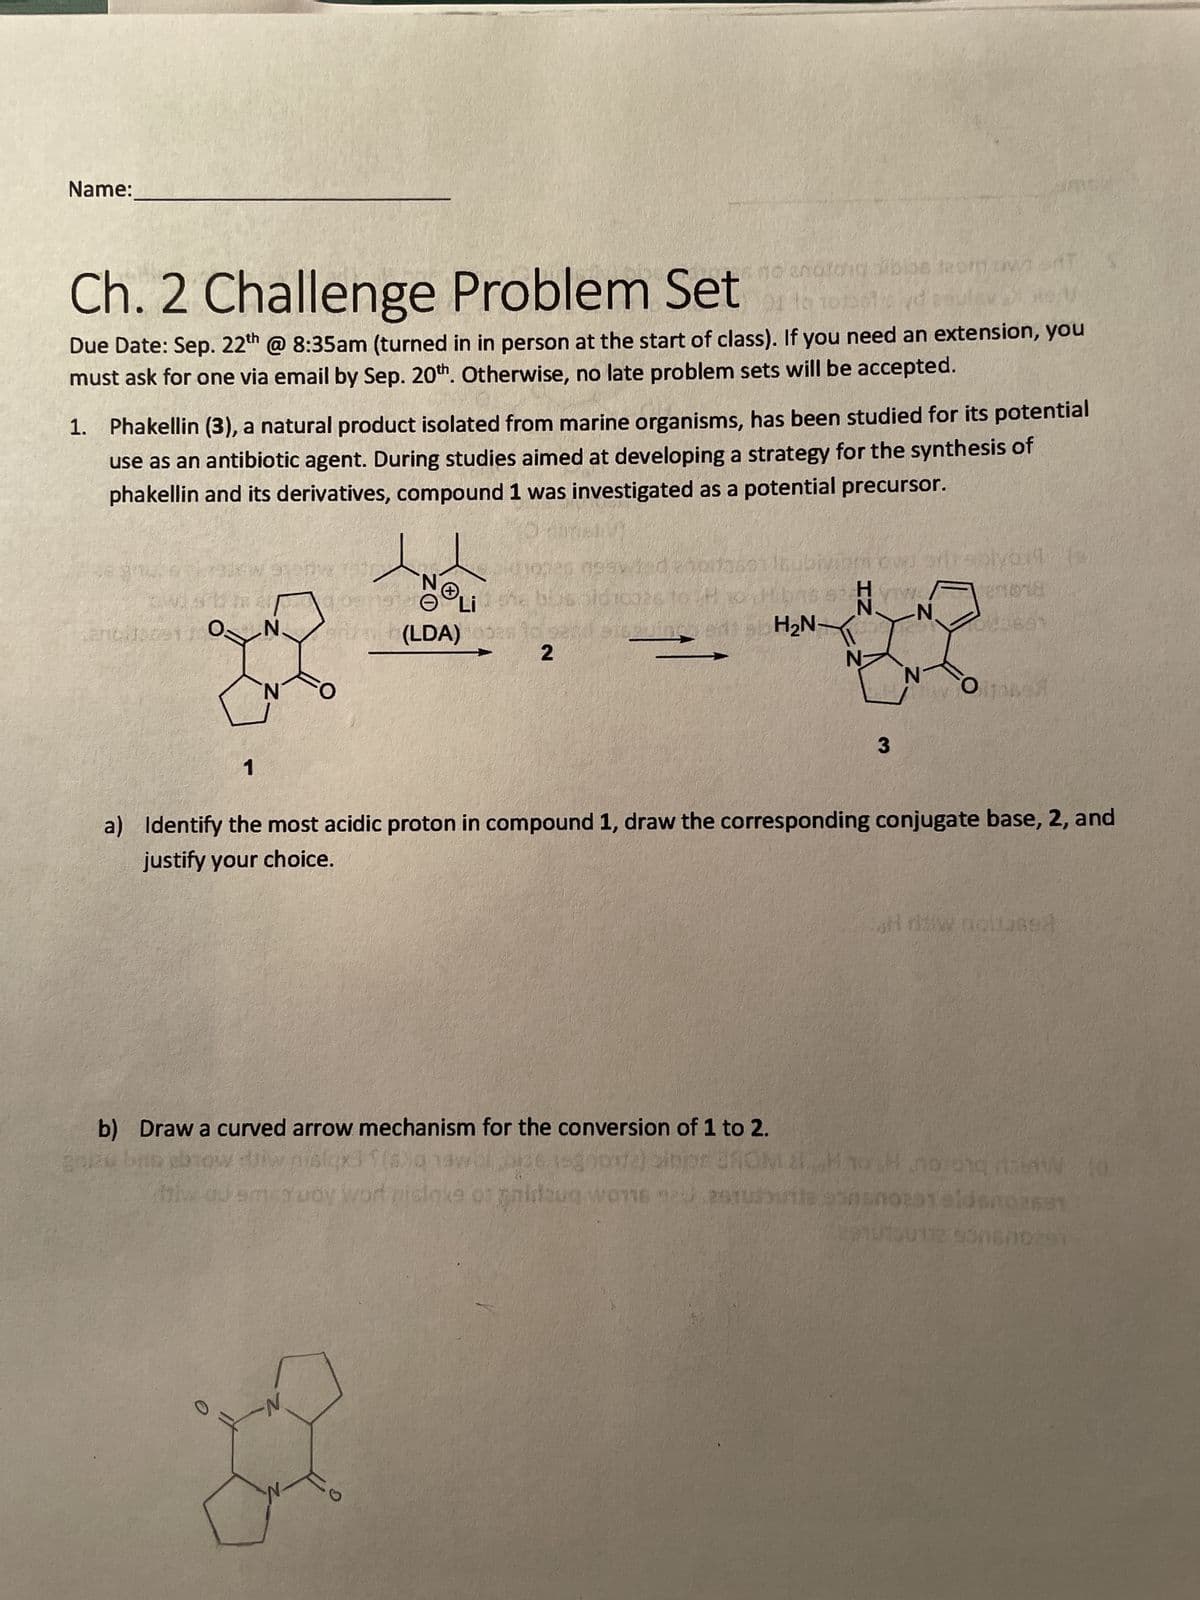 Name:
Ch. 2 Challenge Problem Setor torets d ample
sible from W
2
Due Date: Sep. 22th @ 8:35am (turned in in person at the start of class). If you need an extension, you
must ask for one via email by Sep. 20th. Otherwise, no late problem sets will be accepted.
1. Phakellin (3), a natural product isolated from marine organisms, has been studied for its potential
use as an antibiotic agent. During studies aimed at developing a strategy for the synthesis of
phakellin and its derivatives, compound 1 was investigated as a potential precursor.
grate their wor
CANA
mah
N.
1
N
0
1974 neavited epit7601
Libid 10926 to 26
10028
inc
N
aruah (LDA)
(LDA)
2
G
H₂N-
IZ
N
prirsplvert
27018
0801
670
N₁.
3
a) Identify the most acidic proton in compound 1, draw the corresponding conjugate base, 2, and
justify your choice.
N
How itonen
b) Draw a curved arrow mechanism for the conversion of 1 to 2.
av
new bus abrow diw nislgx3?(s) 1awel 36 1-gene) sinjor 3M 21H0H noronq AW to
miw ou amen woy word piclaxe or gnidzug wons 920 251uurite sono231 eldsn02691
2910730112 930670291
H daw nollased